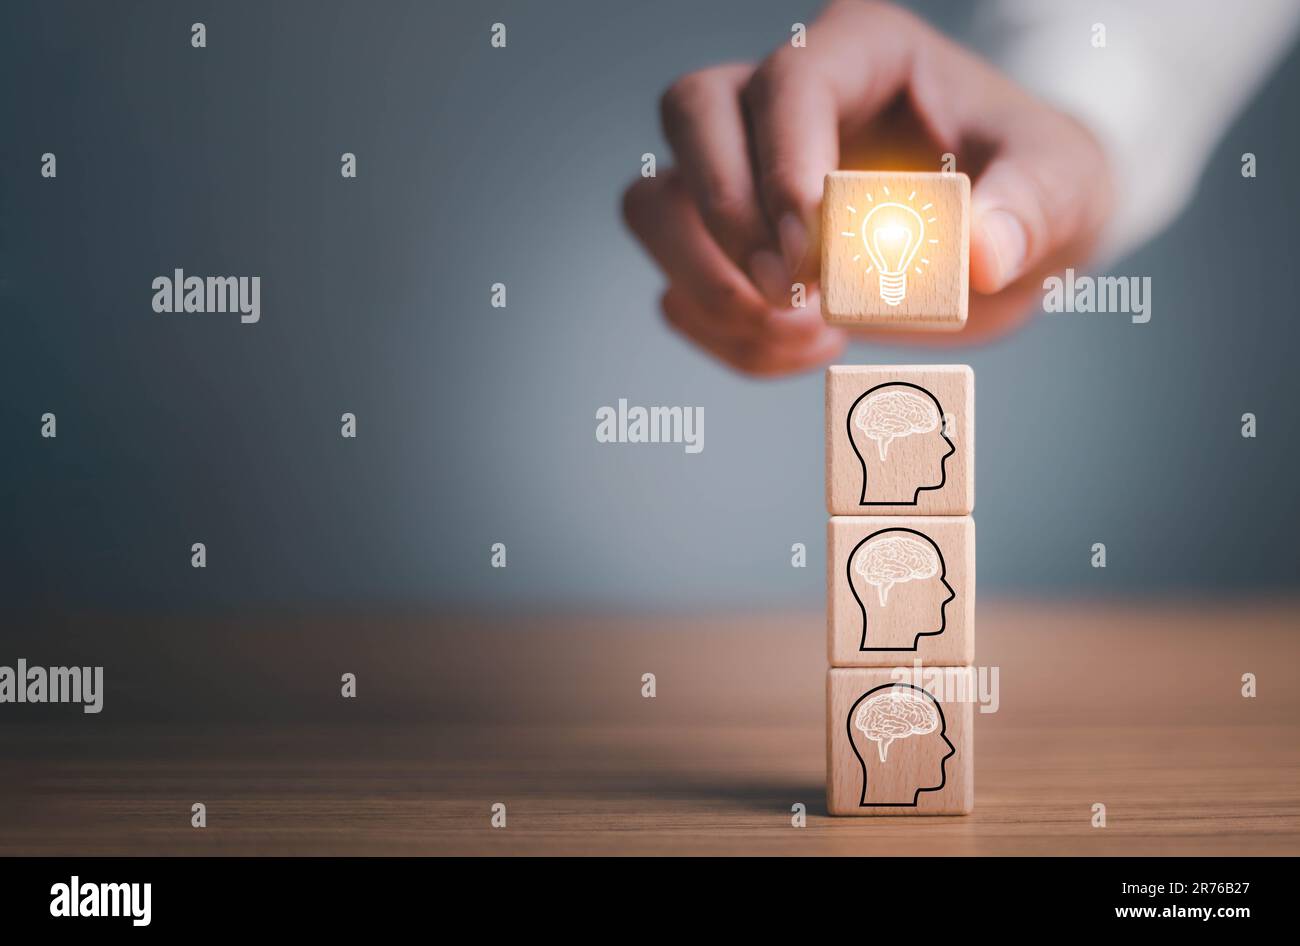 brainstorming creative idea and innovation. Hand putting over wooden cube block with light bulb icon on many people together having an idea symbolized Stock Photo